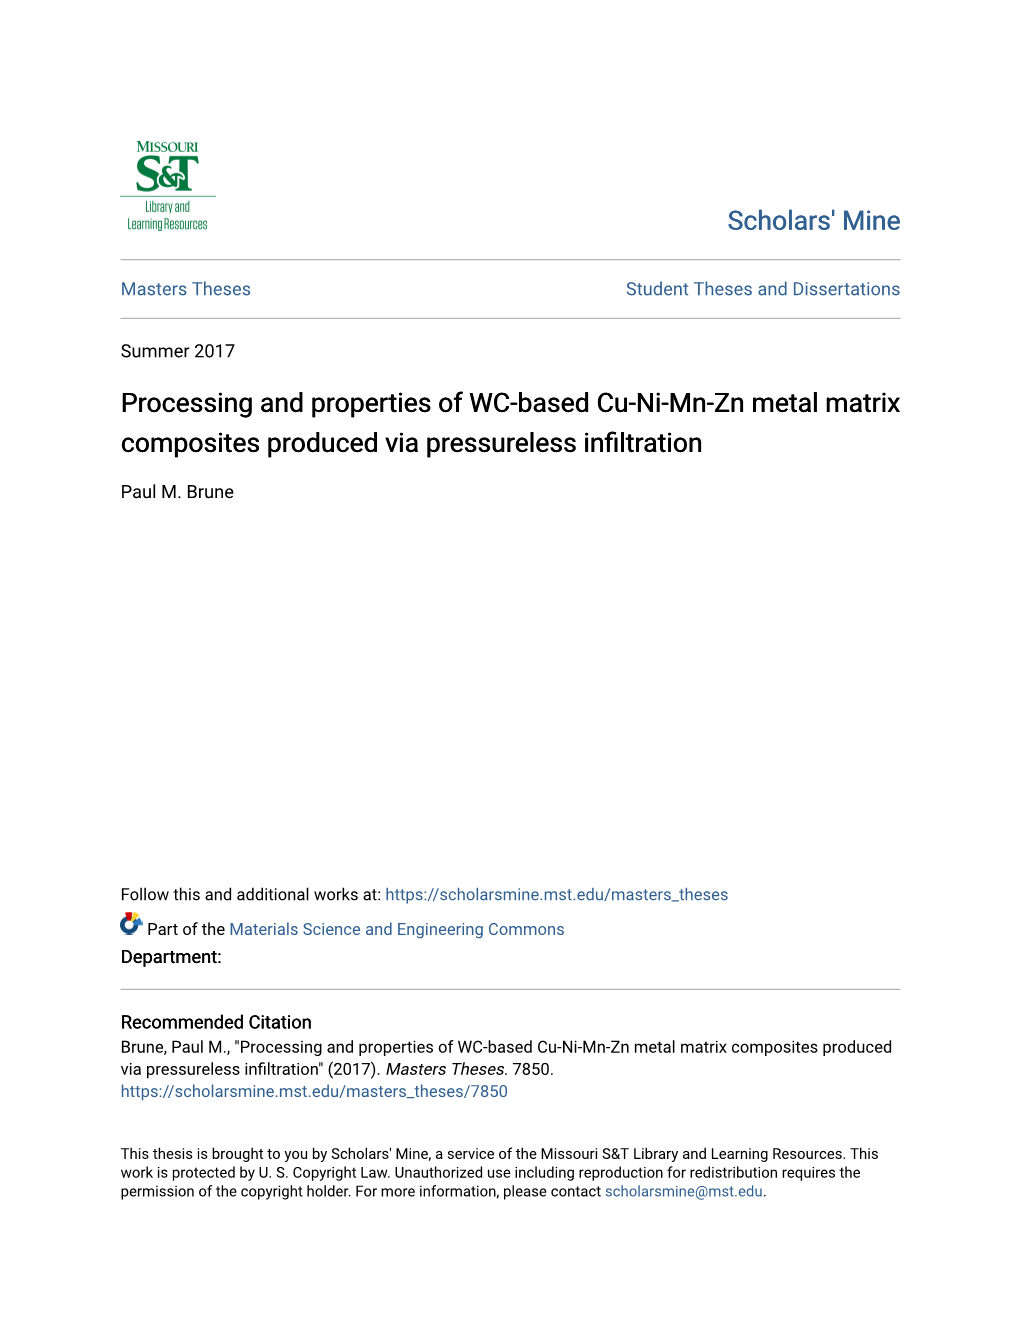 Processing and Properties of WC-Based Cu-Ni-Mn-Zn Metal Matrix Composites Produced Via Pressureless Infiltration